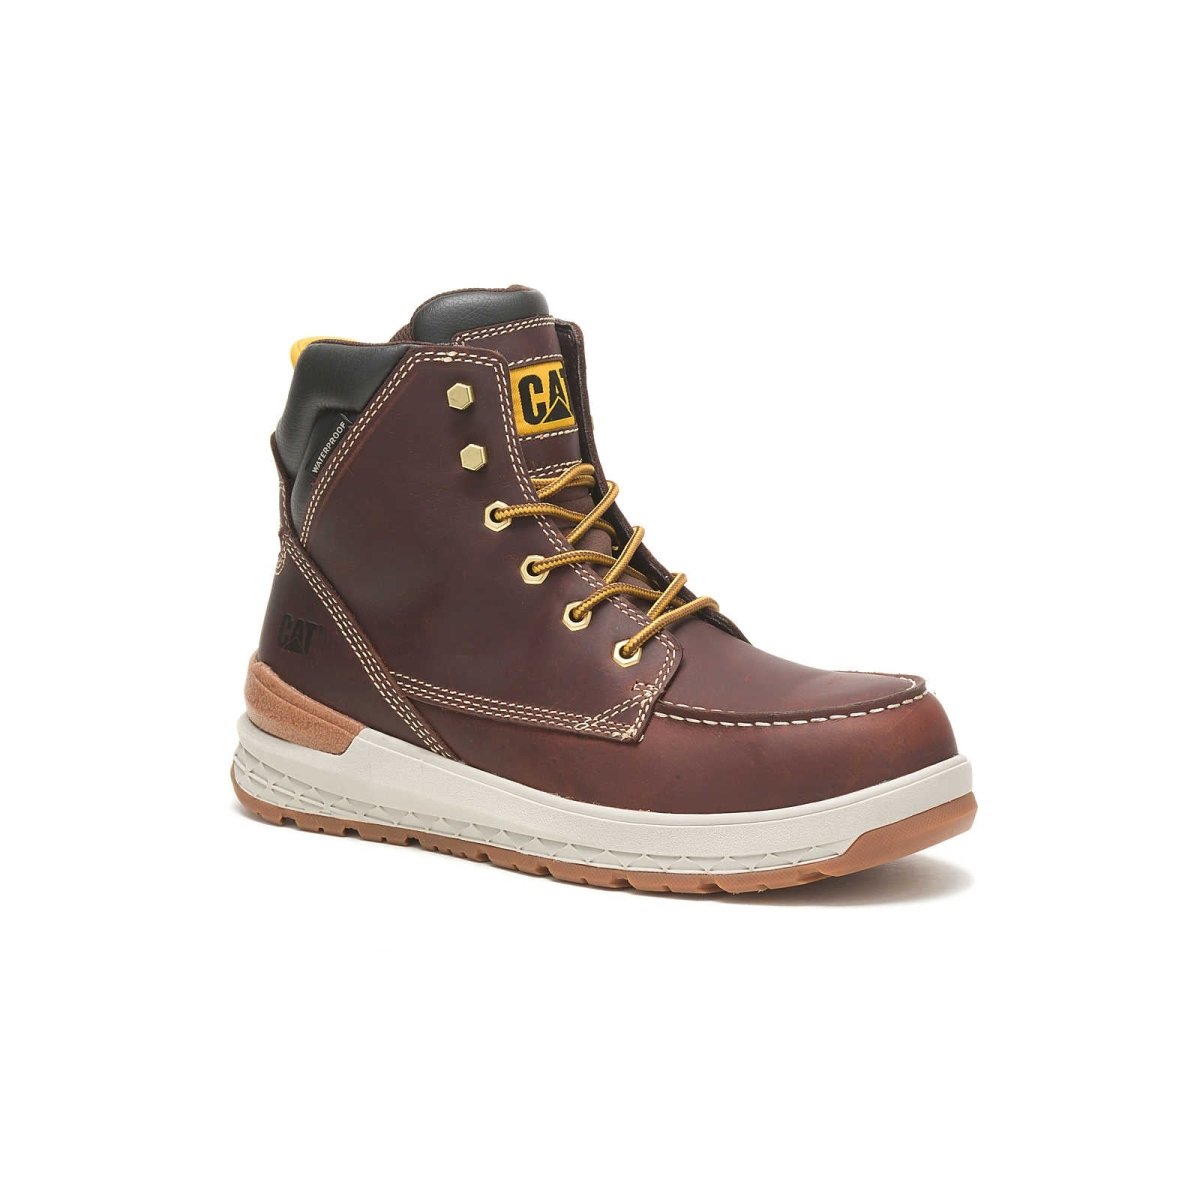 CATERPILLAR IMPACT (P91402) WATERPROOF CARBON COMPOSITE TOE MEN'S WORK BOOT IN FRIAR BROWN - TLW Shoes